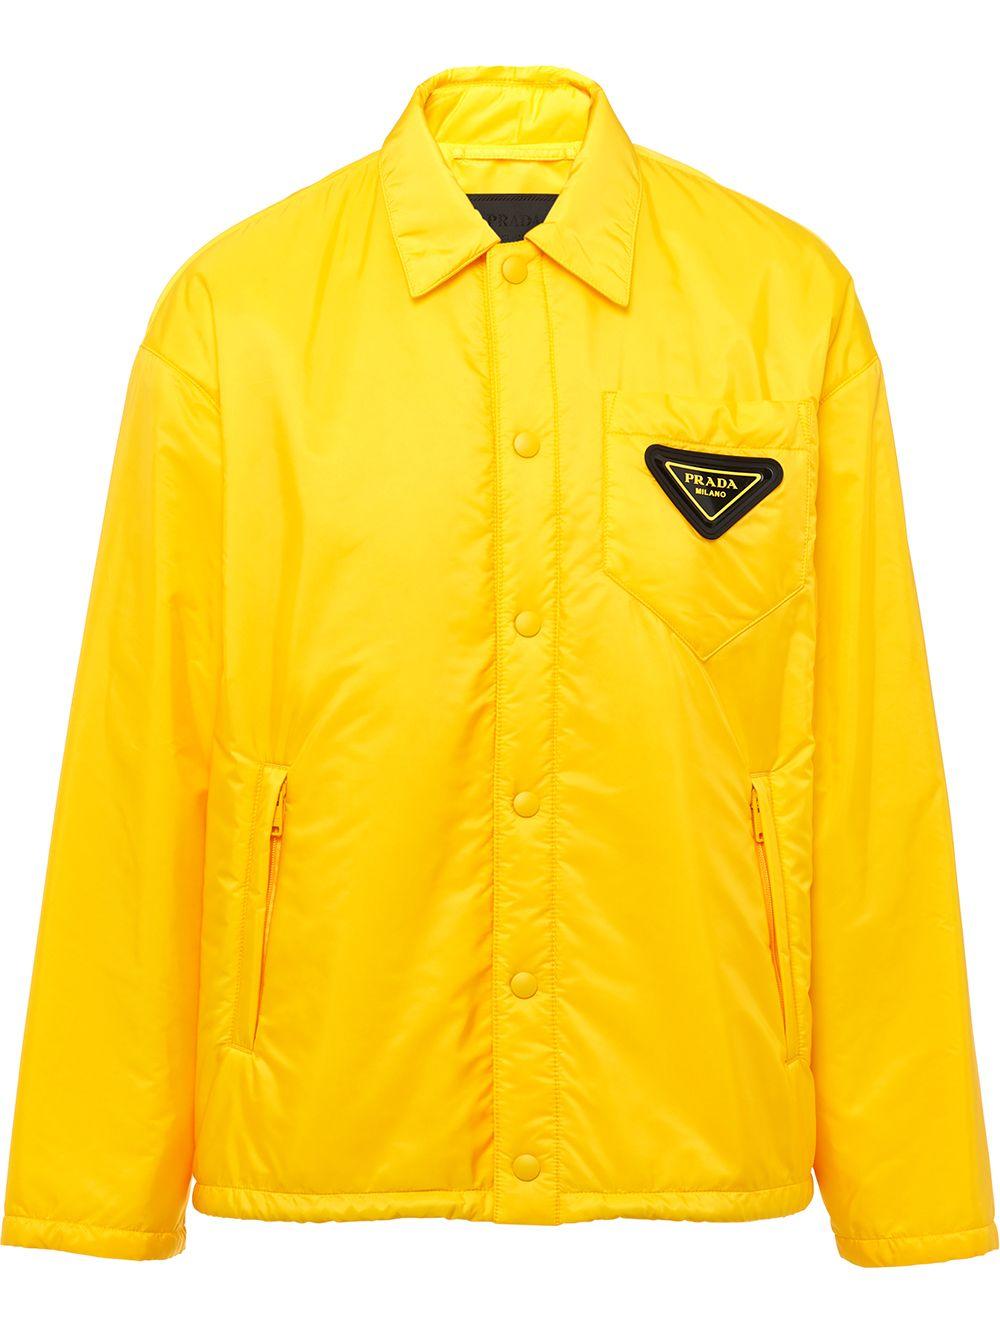 Prada Synthetic Re-nylon Lightweight Jacket in Yellow for Men - Lyst